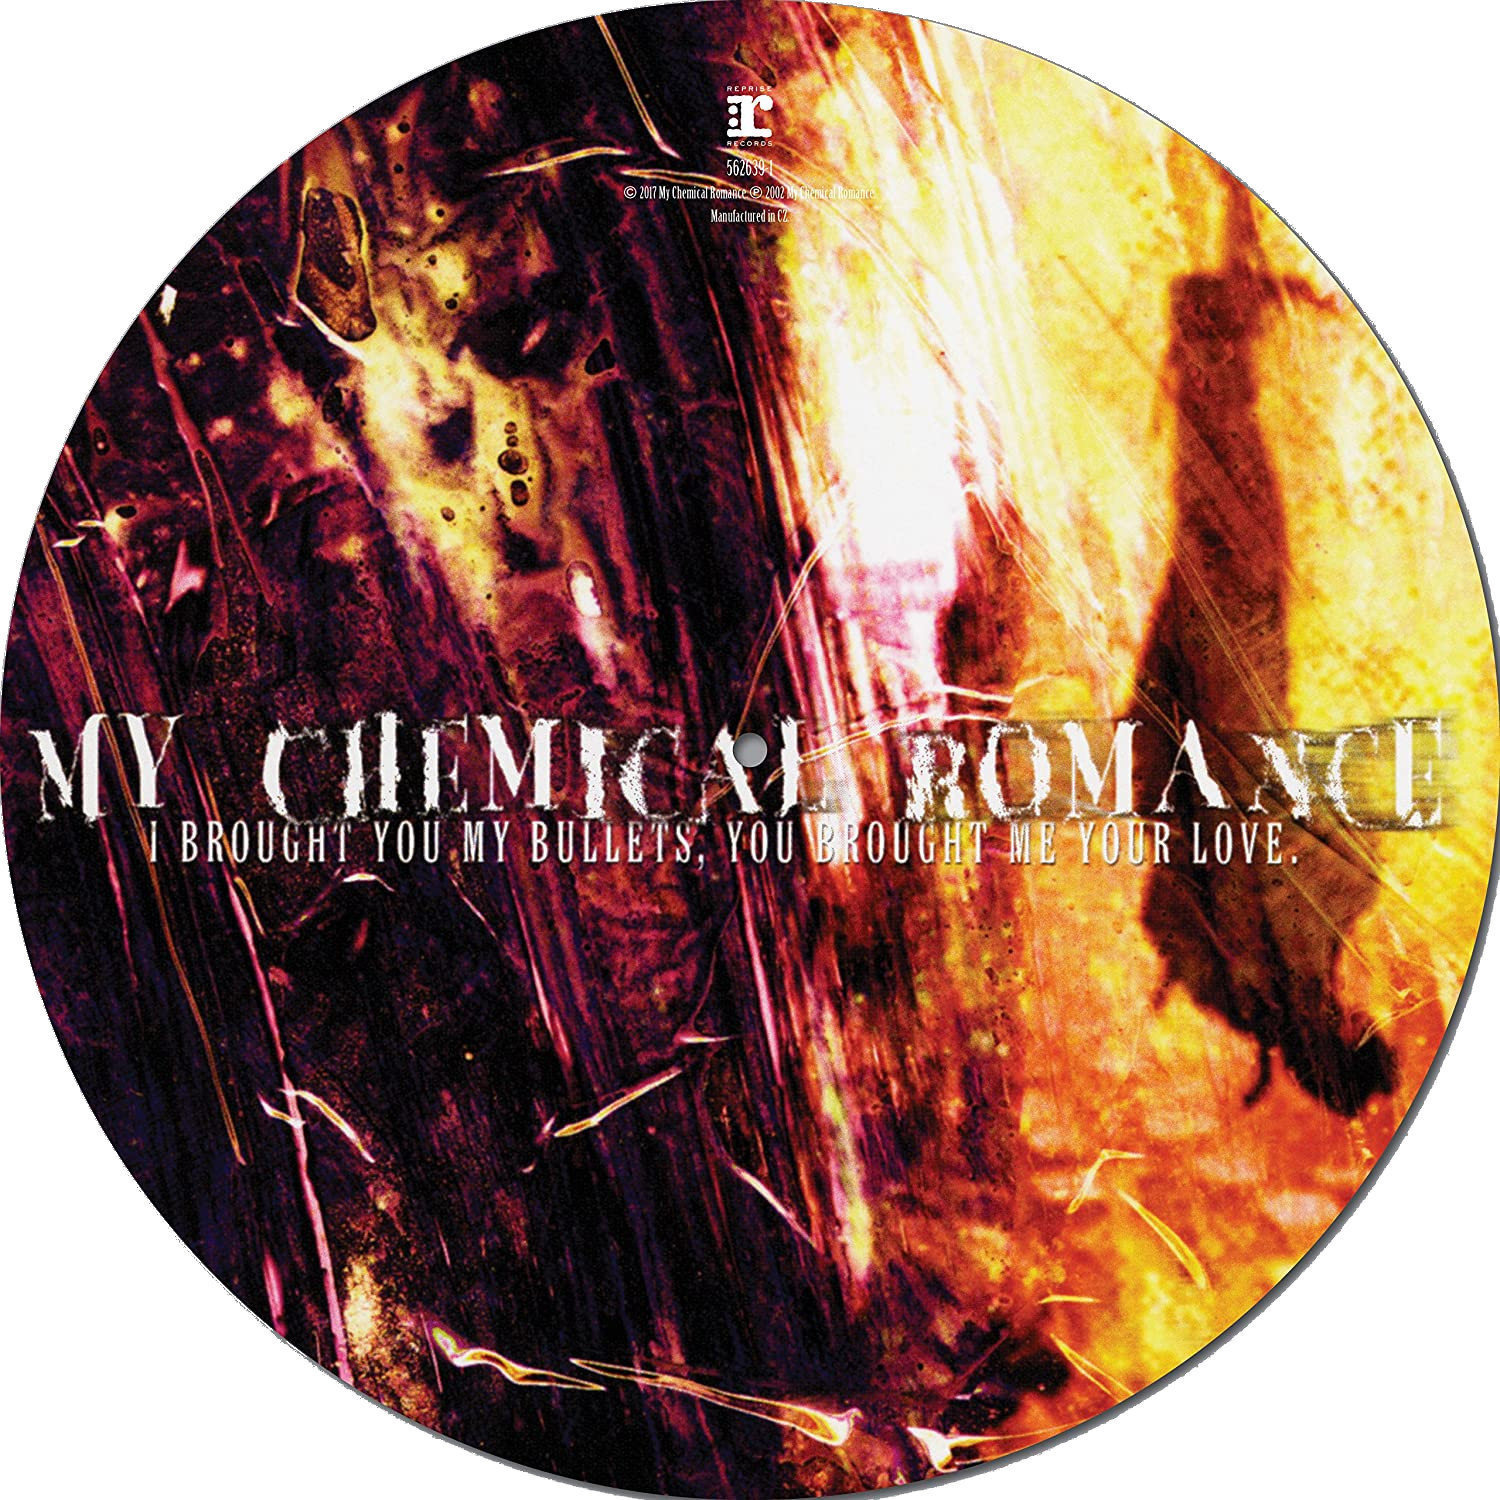 Disco de vinil My Chemical Romance - I Brought You My Bullets, You Brought Me Your Love (Picture Disc) (LP)